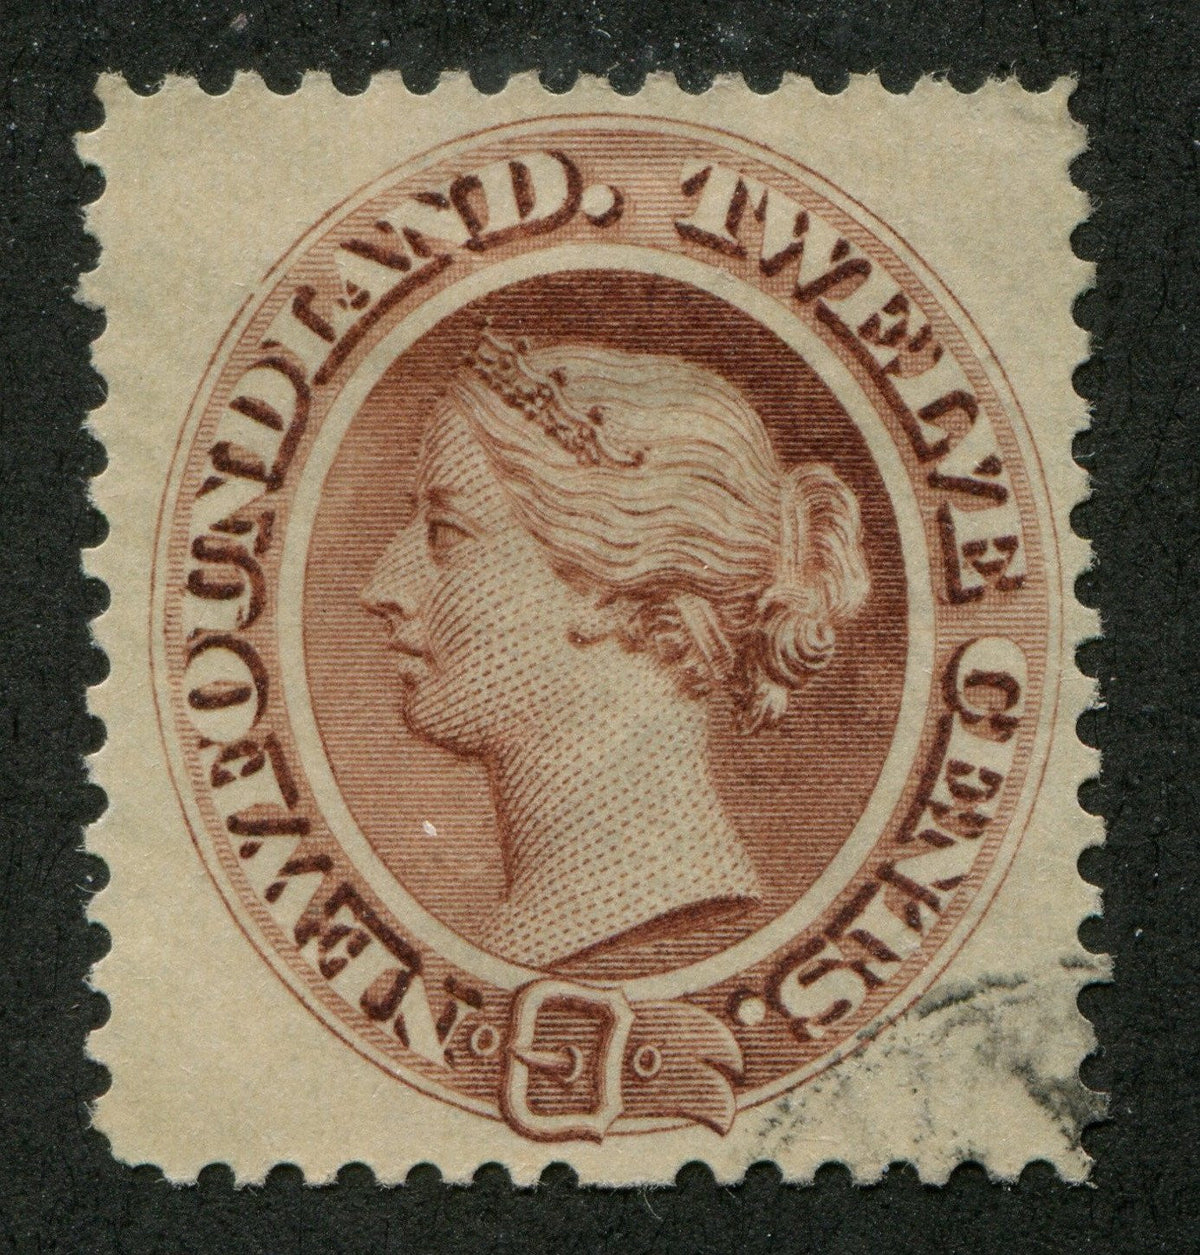 0029NF1707 - Newfoundland #29ii - Used Re-Entry